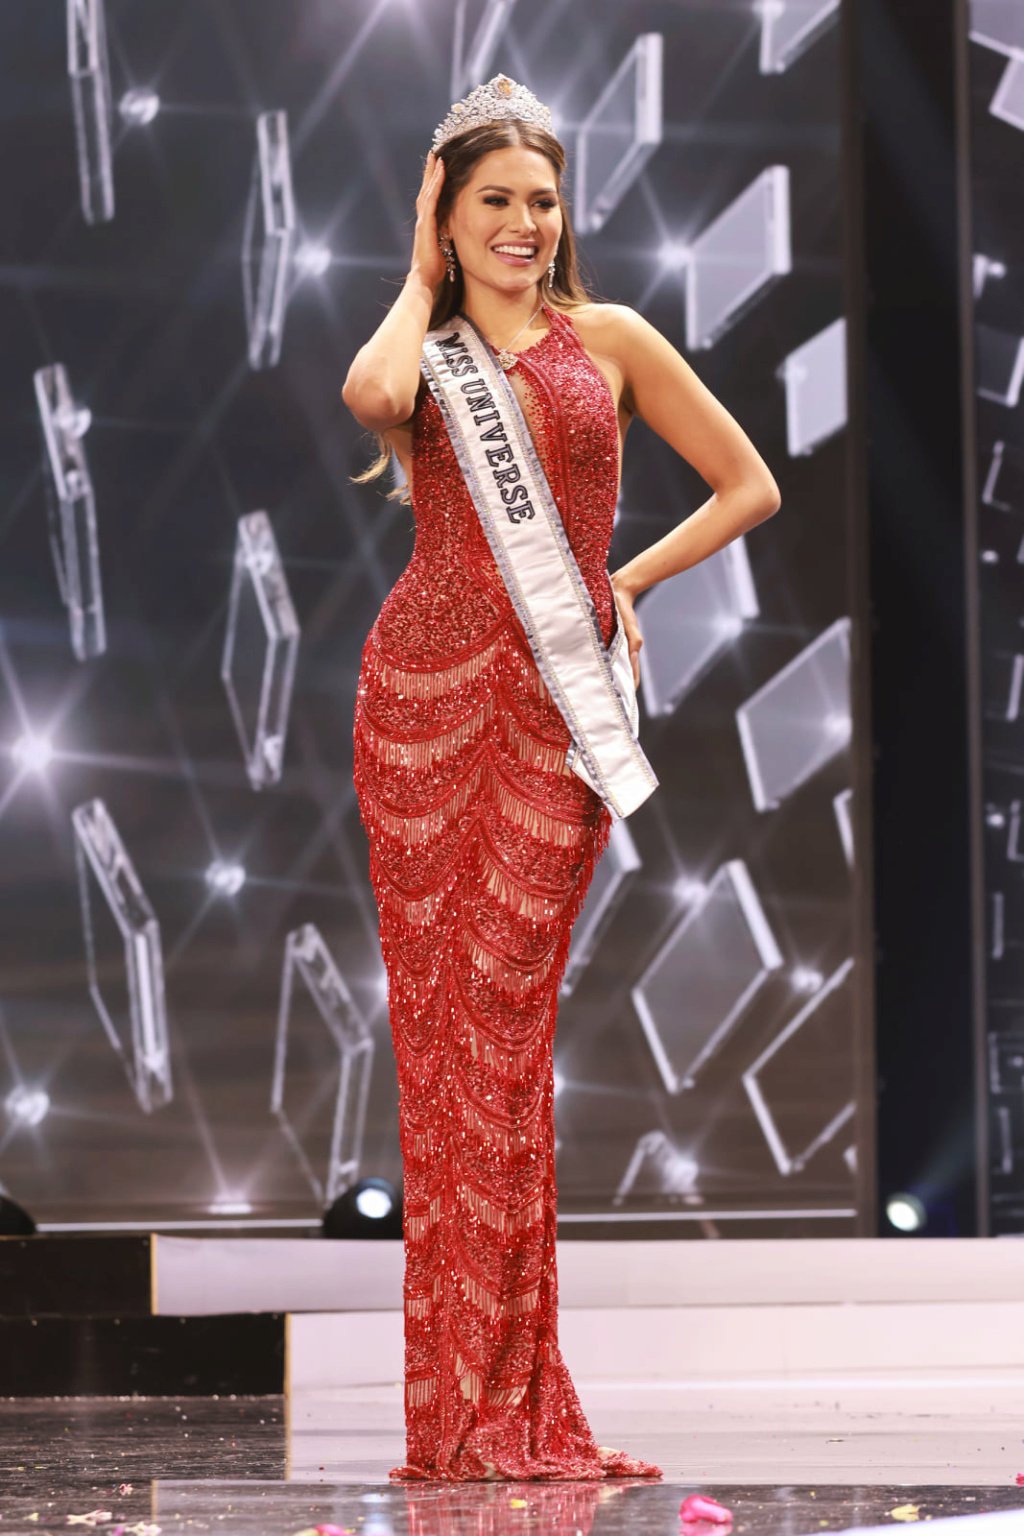 The Official Thread Of Miss Universe 2020 - Andrea Meza of Mexico  18762310